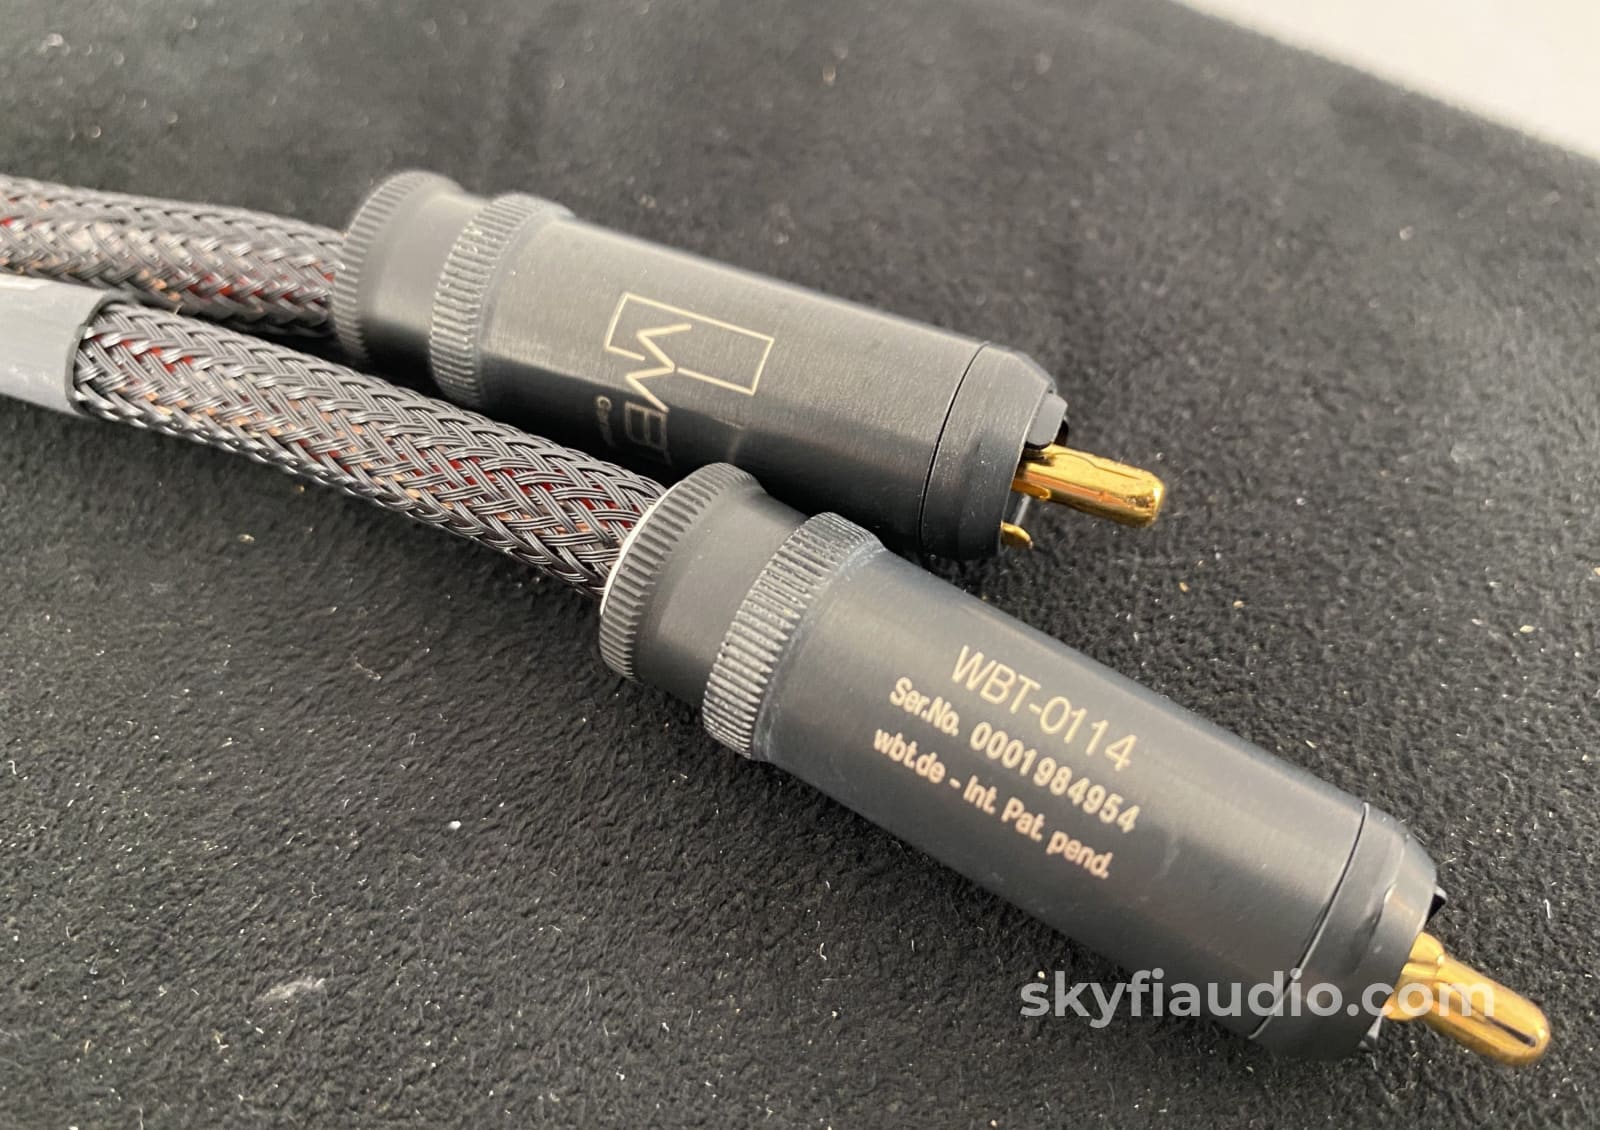 Kimber Kable - Hero RCA Cables With WBT Connectors - 0.5M, New